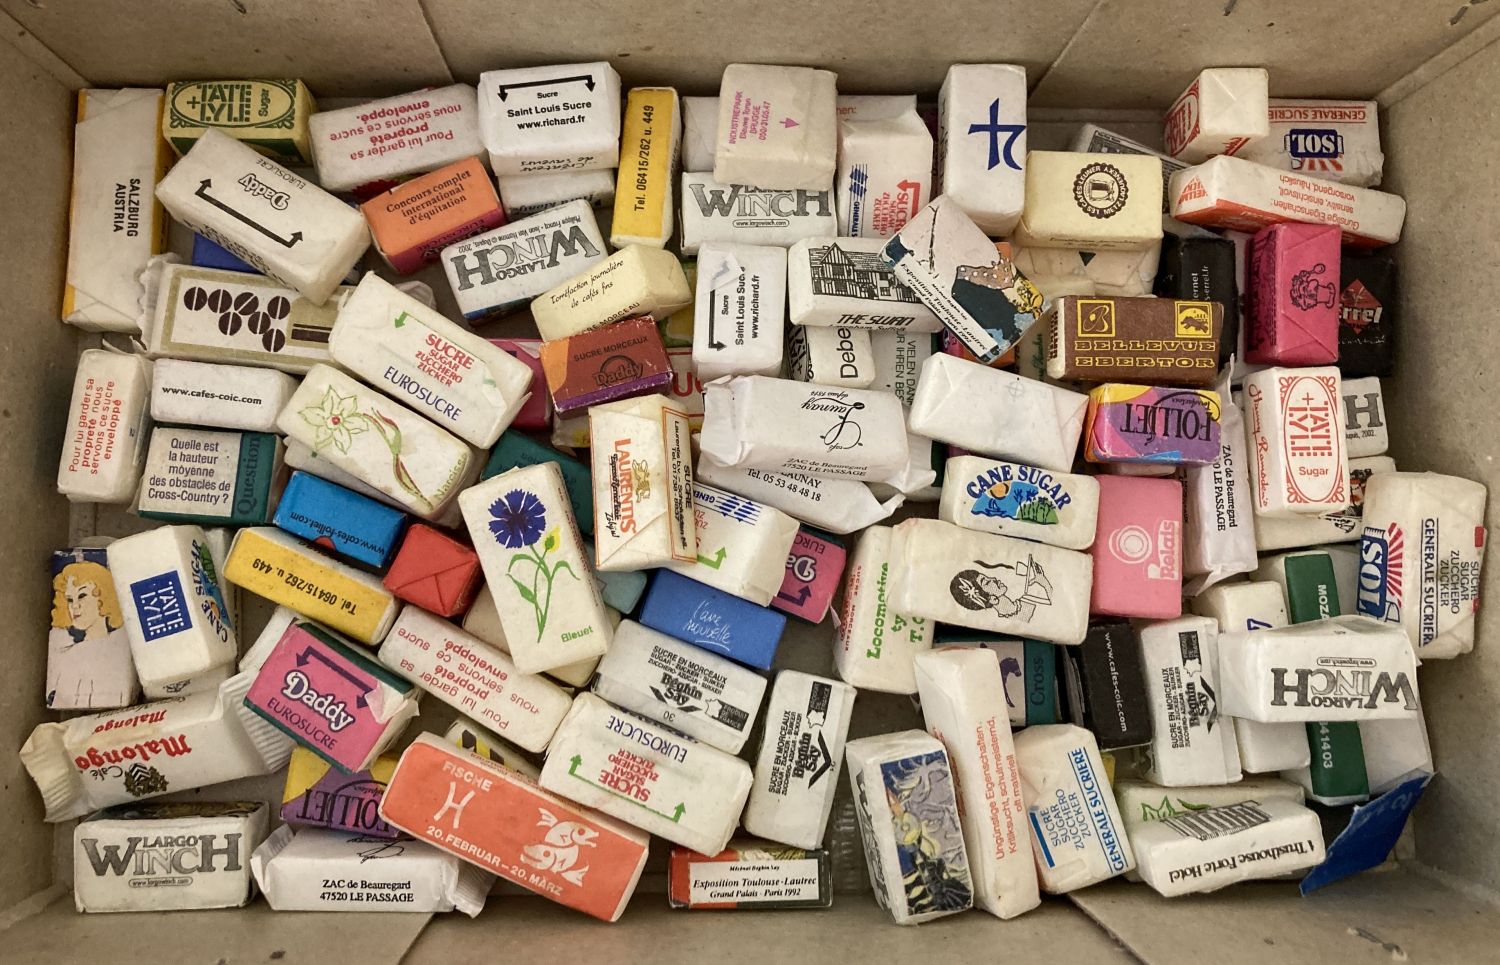 Sucrology collection - 4 boxes of vintage collectable sugar packets and sachets. - Image 8 of 8